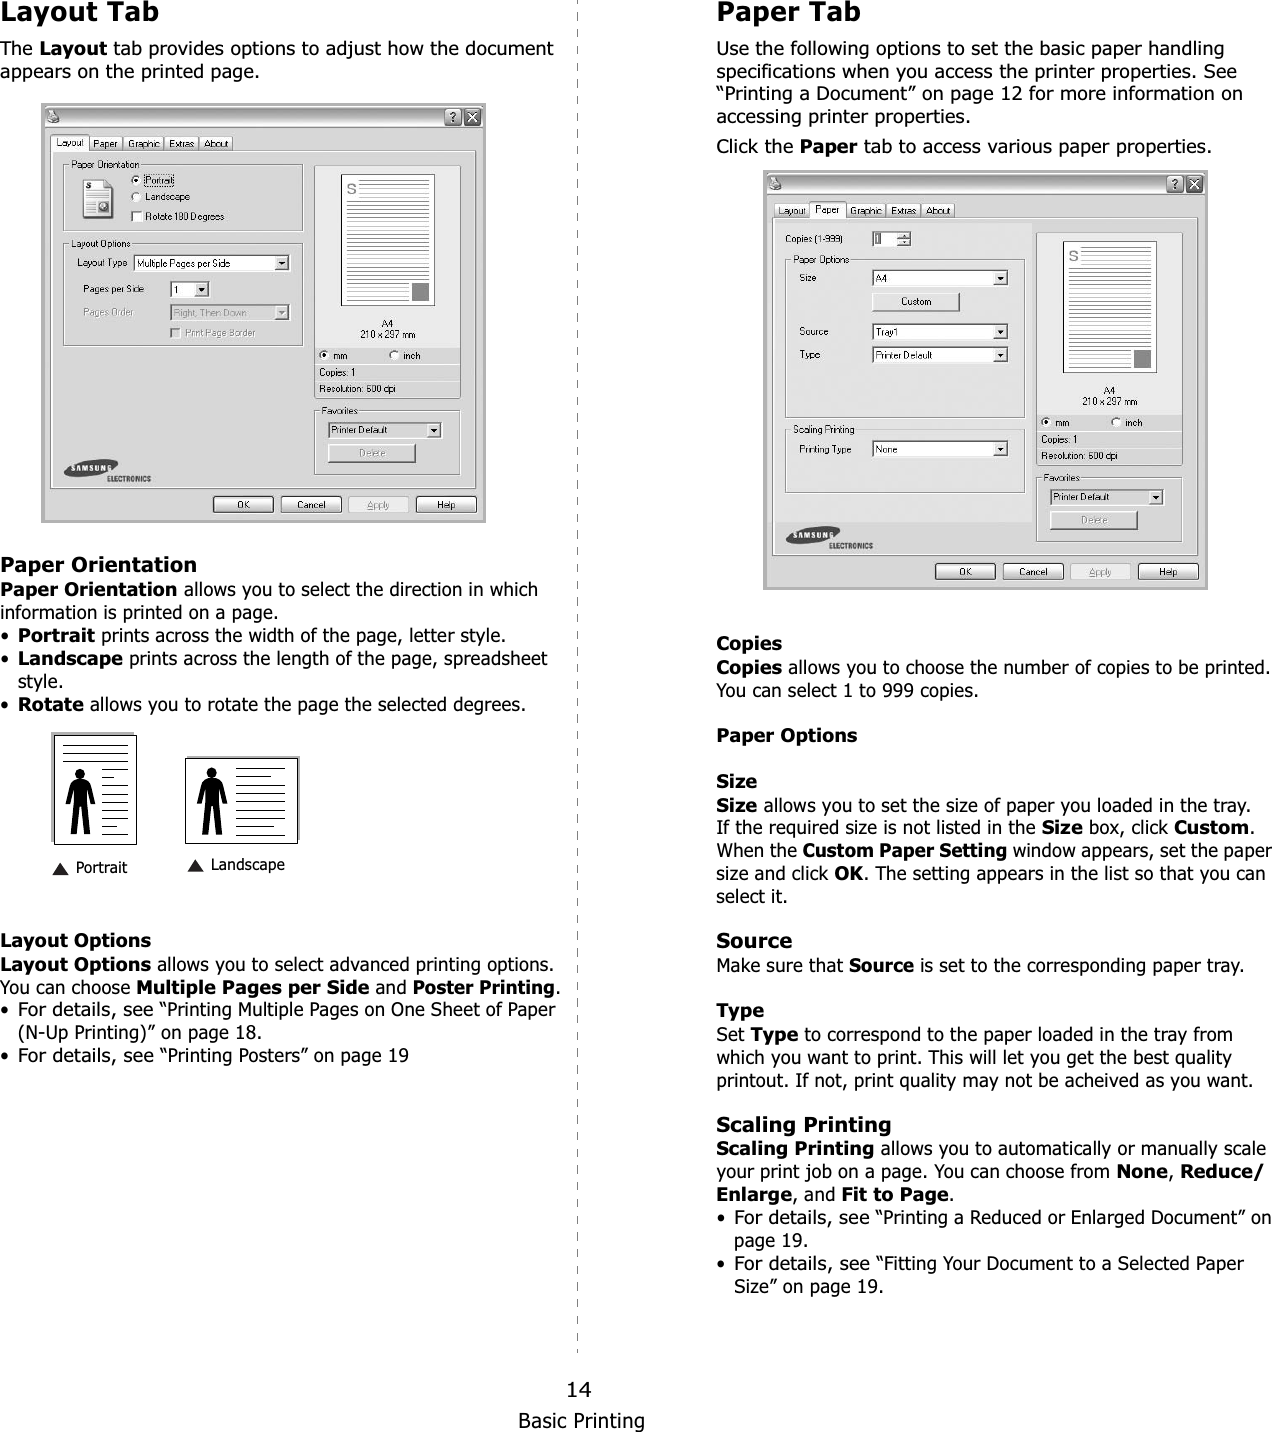 Basic Printing14Layout TabThe Layout tab provides options to adjust how the document appears on the printed page.   Paper OrientationPaper Orientation allows you to select the direction in which information is printed on a page. •Portrait prints across the width of the page, letter style. •Landscape prints across the length of the page, spreadsheet style. •Rotate allows you to rotate the page the selected degrees.Layout OptionsLayout Options allows you to select advanced printing options. You can choose Multiple Pages per Side and Poster Printing.•For details, see “Printing Multiple Pages on One Sheet of Paper (N-Up Printing)” on page 18.•For details, see “Printing Posters” on page 19 Landscape PortraitPaper TabUse the following options to set the basic paper handling specifications when you access the printer properties. See “Printing a Document” on page 12 for more information on accessing printer properties. Click the Paper tab to access various paper properties. CopiesCopies allows you to choose the number of copies to be printed. You can select 1 to 999 copies. Paper OptionsSizeSize allows you to set the size of paper you loaded in the tray. If the required size is not listed in the Size box, click Custom.When the Custom Paper Setting window appears, set the paper size and click OK. The setting appears in the list so that you can select it. SourceMake sure that Source is set to the corresponding paper tray.TypeSet Type to correspond to the paper loaded in the tray from which you want to print. This will let you get the best quality printout. If not, print quality may not be acheived as you want.Scaling PrintingScaling Printing allows you to automatically or manually scale your print job on a page. You can choose from None,Reduce/Enlarge, and Fit to Page.•For details, see “Printing a Reduced or Enlarged Document” on page 19.•For details, see “Fitting Your Document to a Selected Paper Size” on page 19.